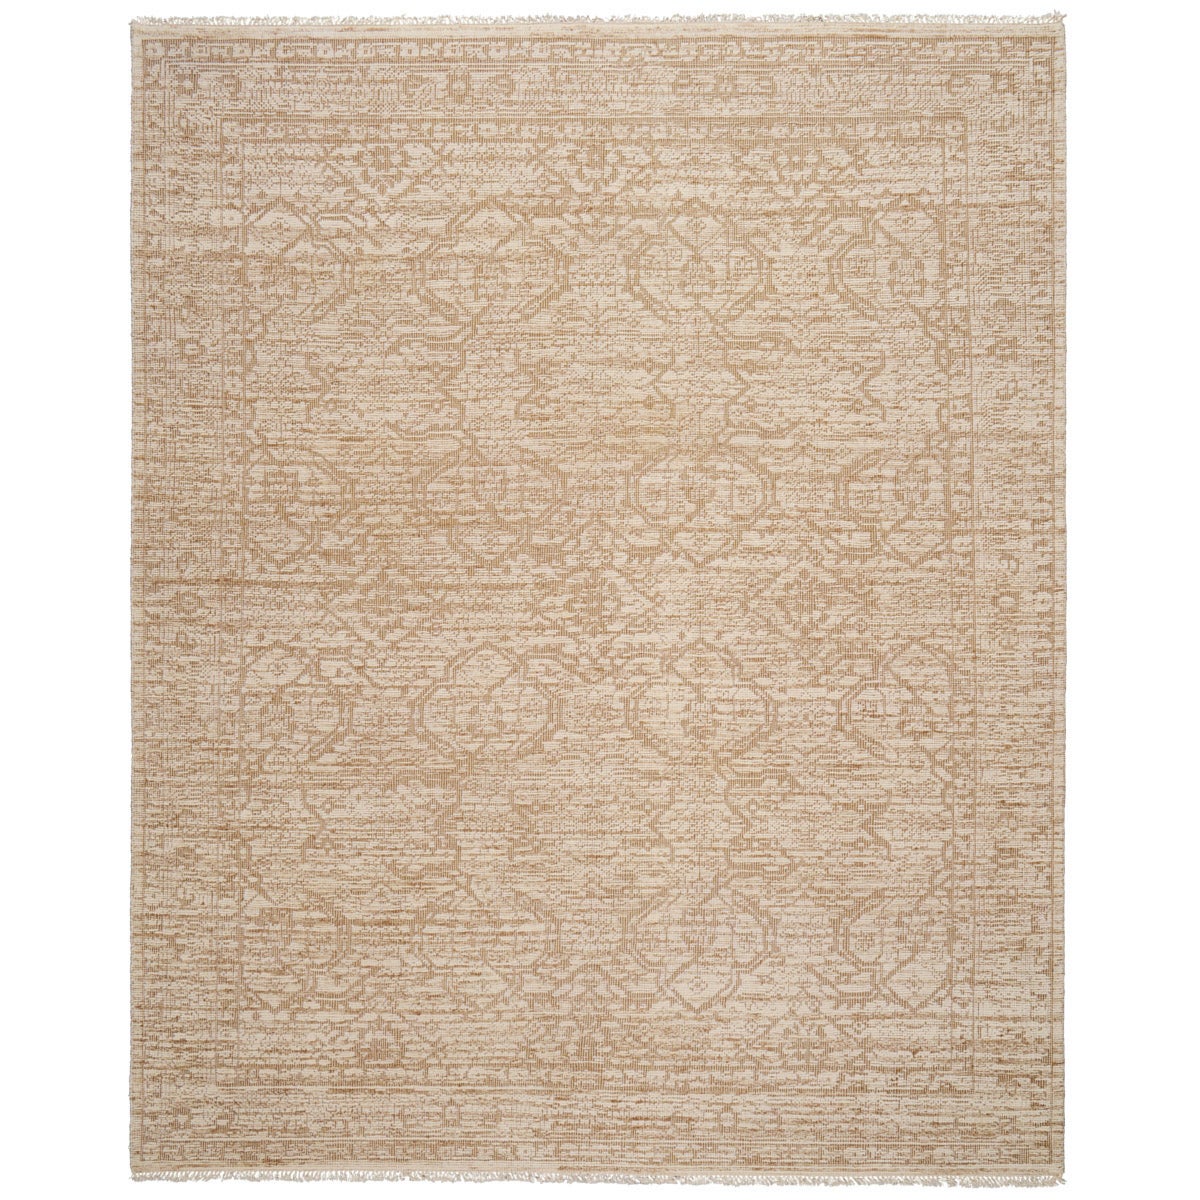 Ankara Hand-Knotted Wool Rug in Sand, 8x10' For Sale